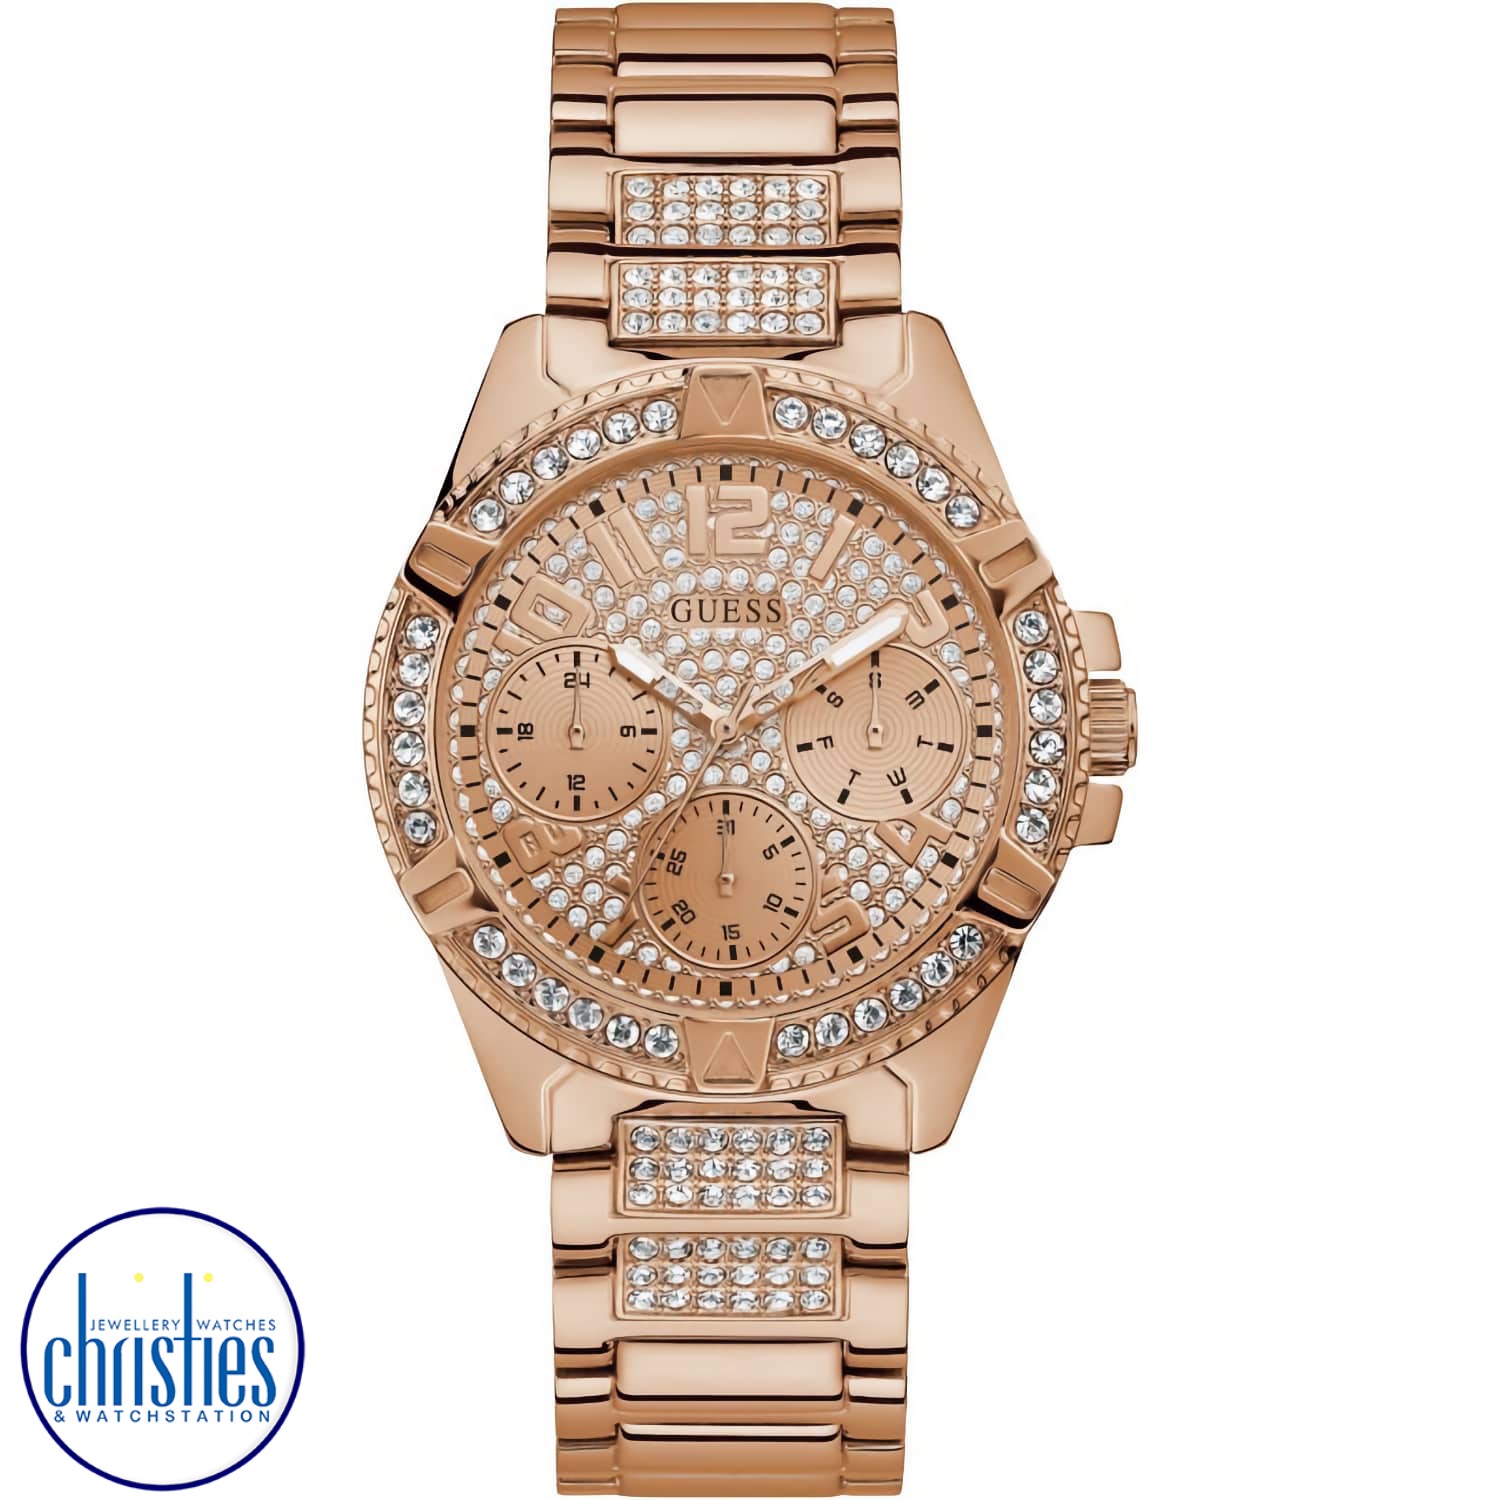 W1156L3 GUESS Lady Frontier Rose Gold Watch. GUESS Ladies watch featuring a polished rose gold case with crystals nad a  sunray rose glitz multifunction dial, and polished rose gold bracelet. guess watches women's sale